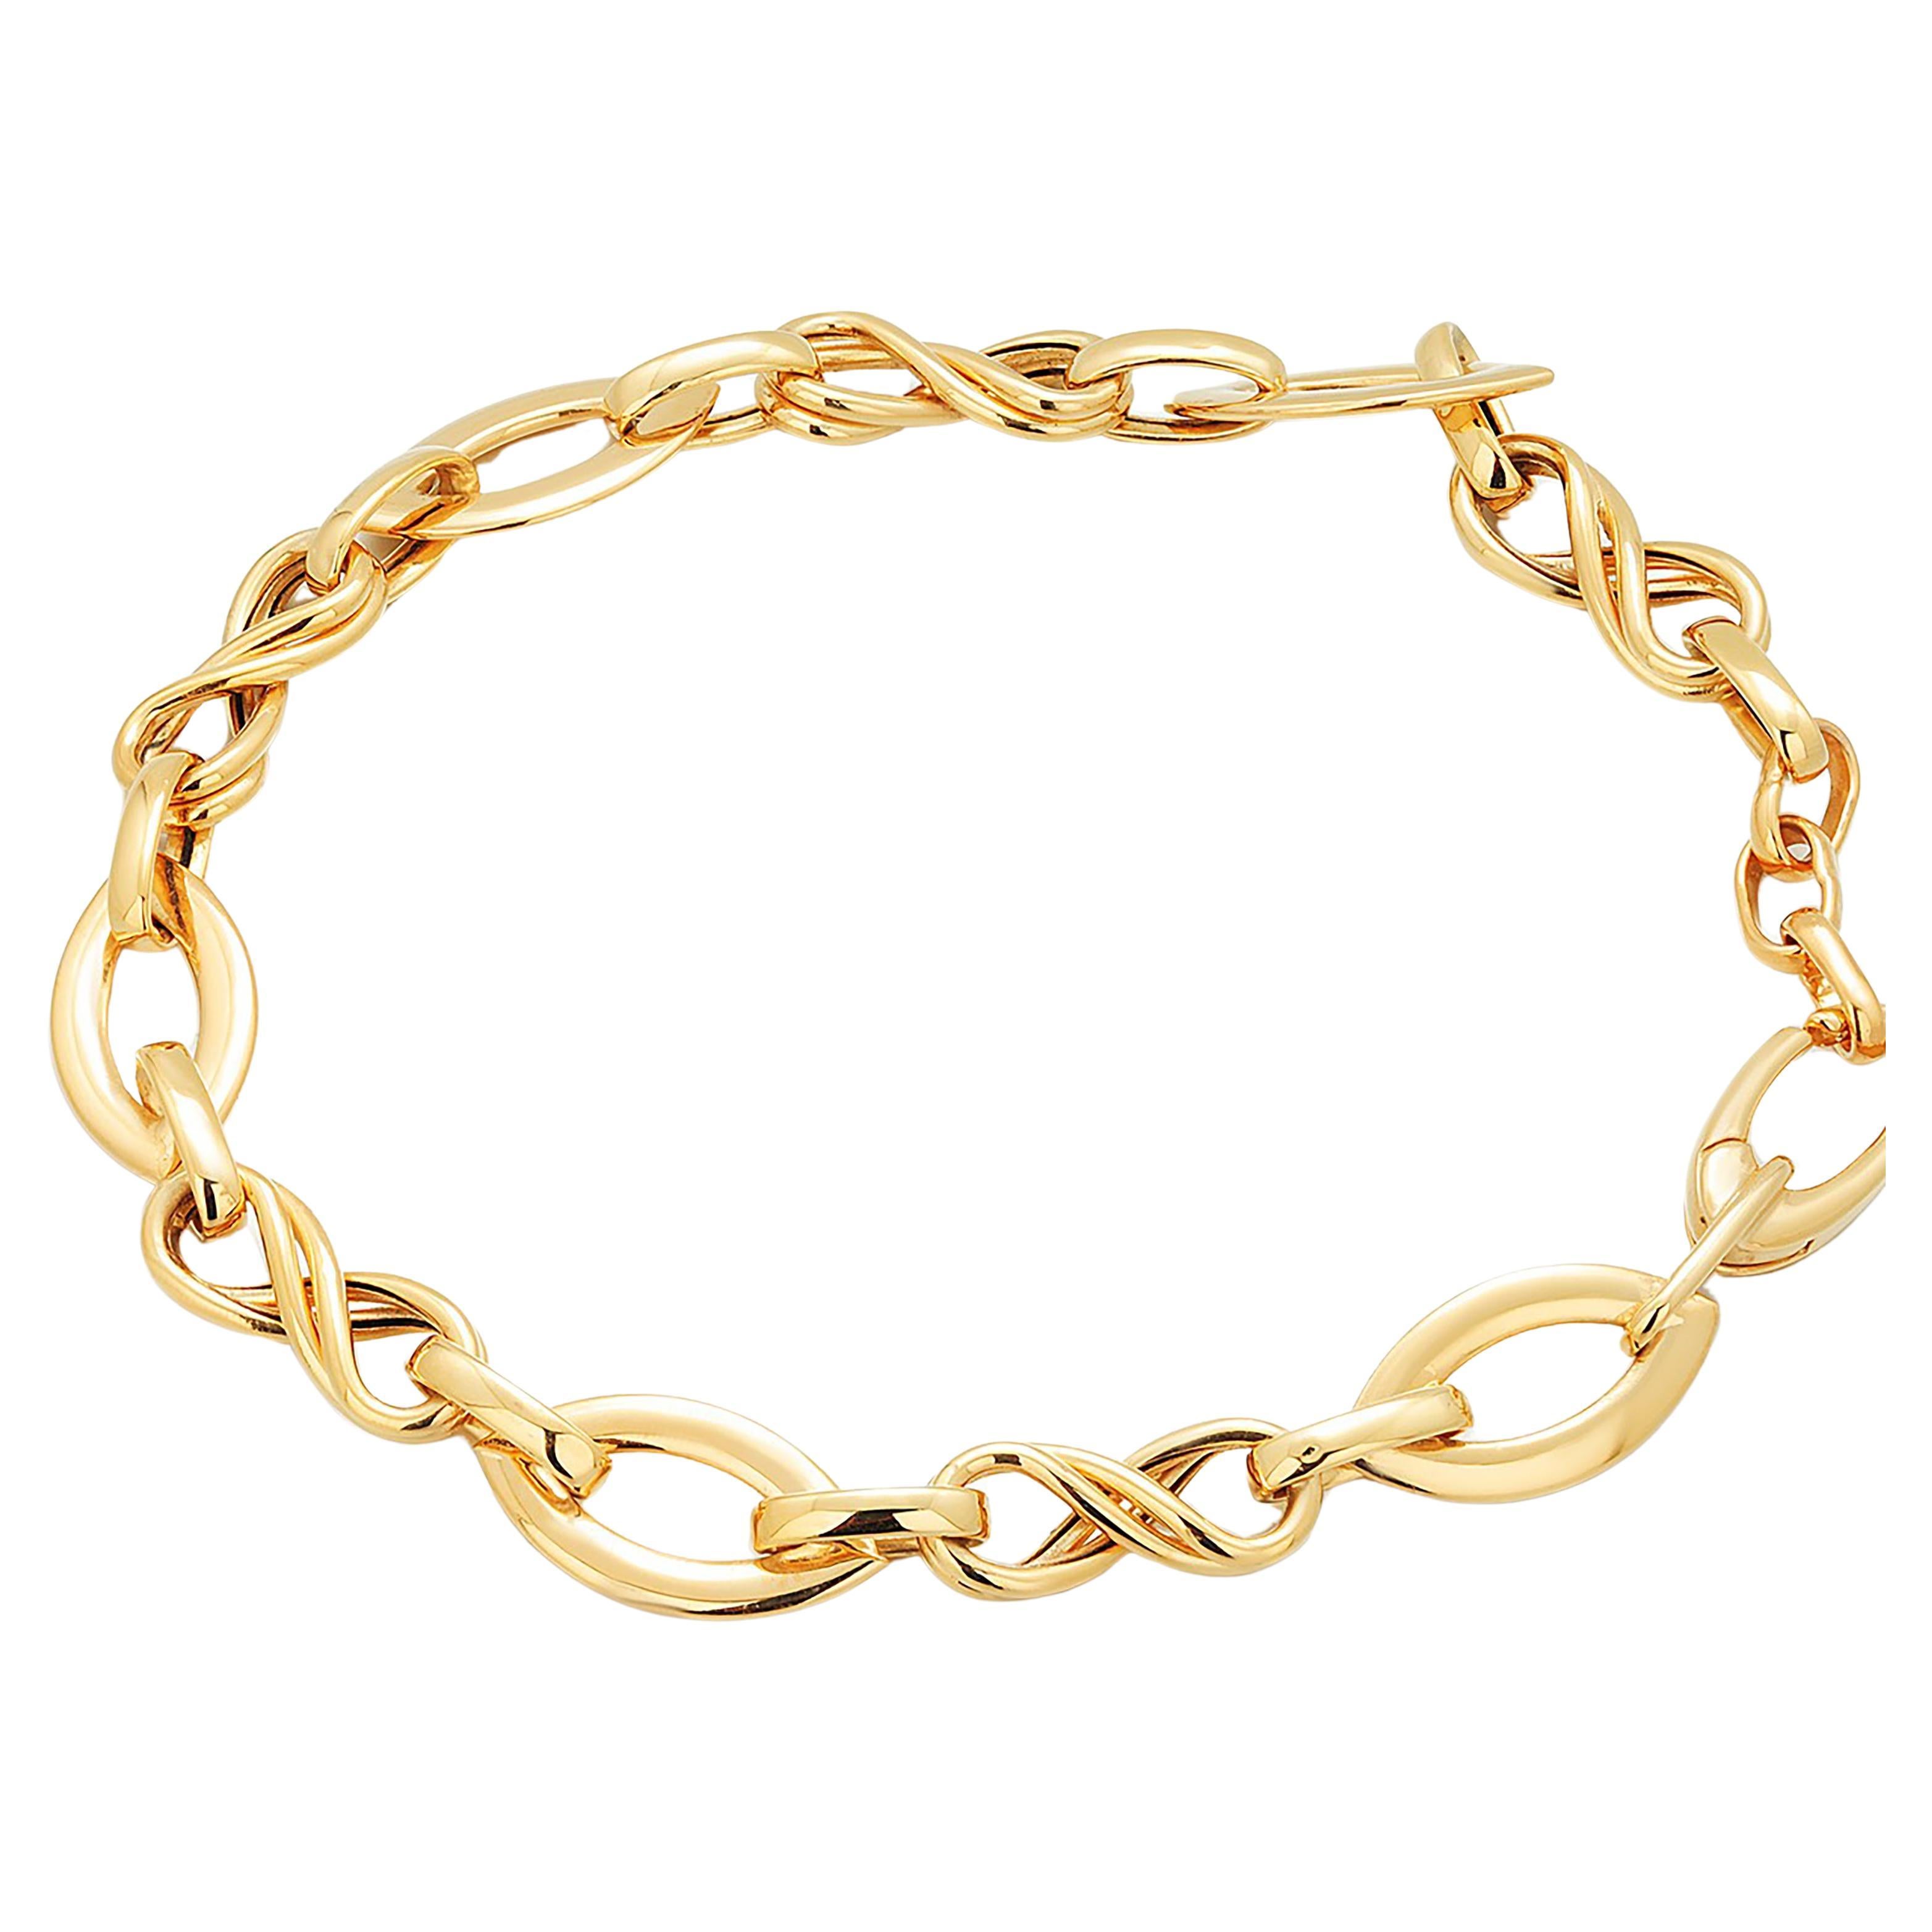 Eight Inch Link Chain Bracelet Invisible Catch 14 Karat Yellow Gold 